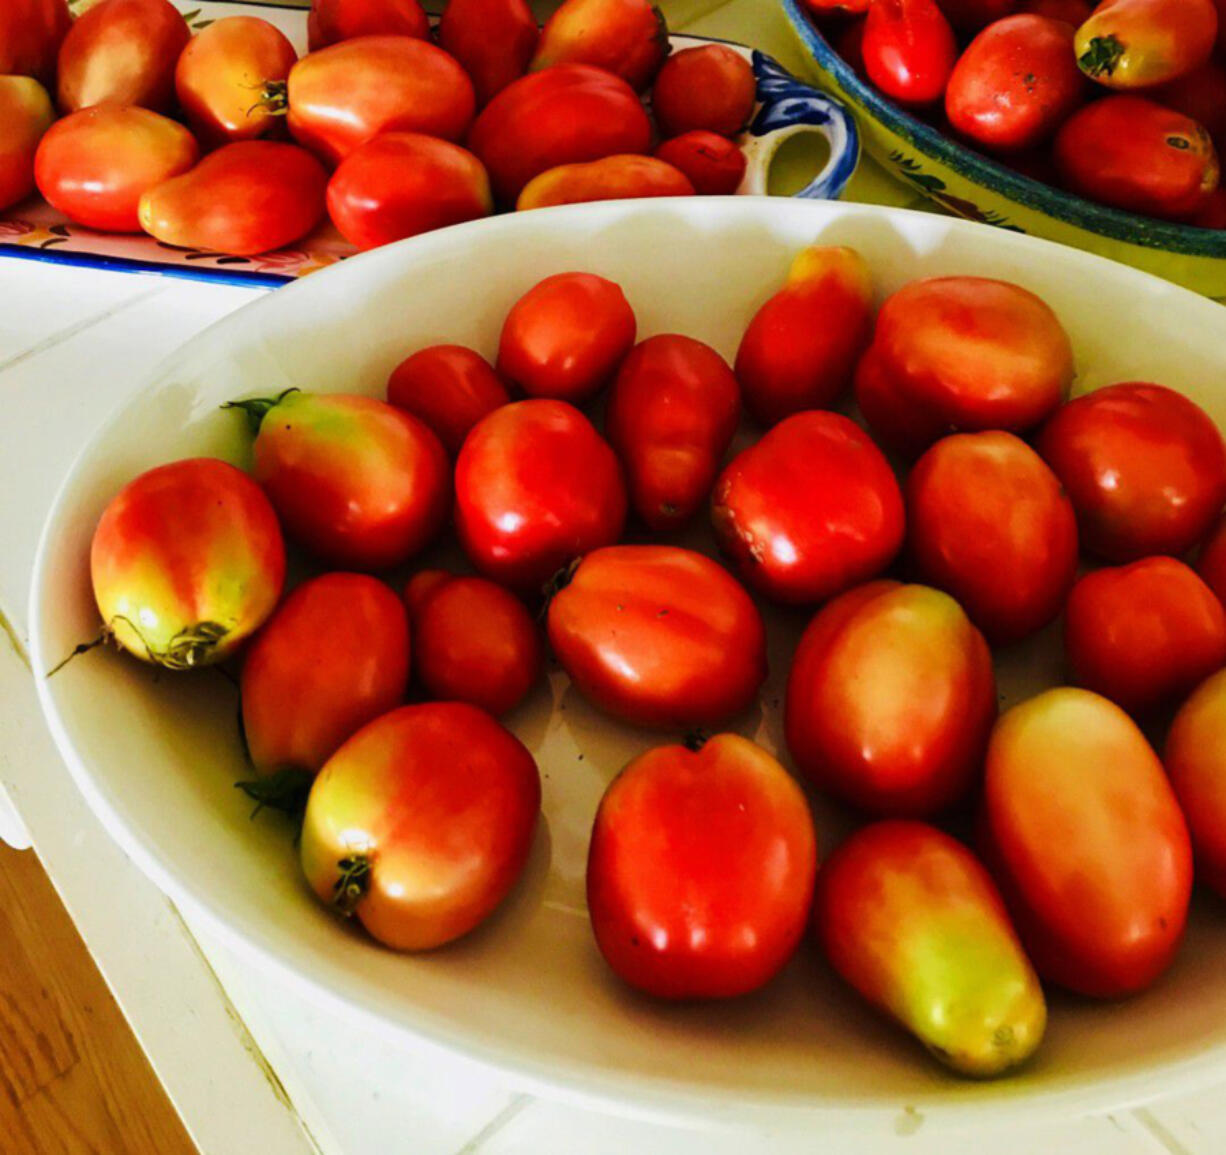 Fresh plum tomatoes from the summer garden should not be refrigerated; they should be used as soon as possible to make a marinara sauce.